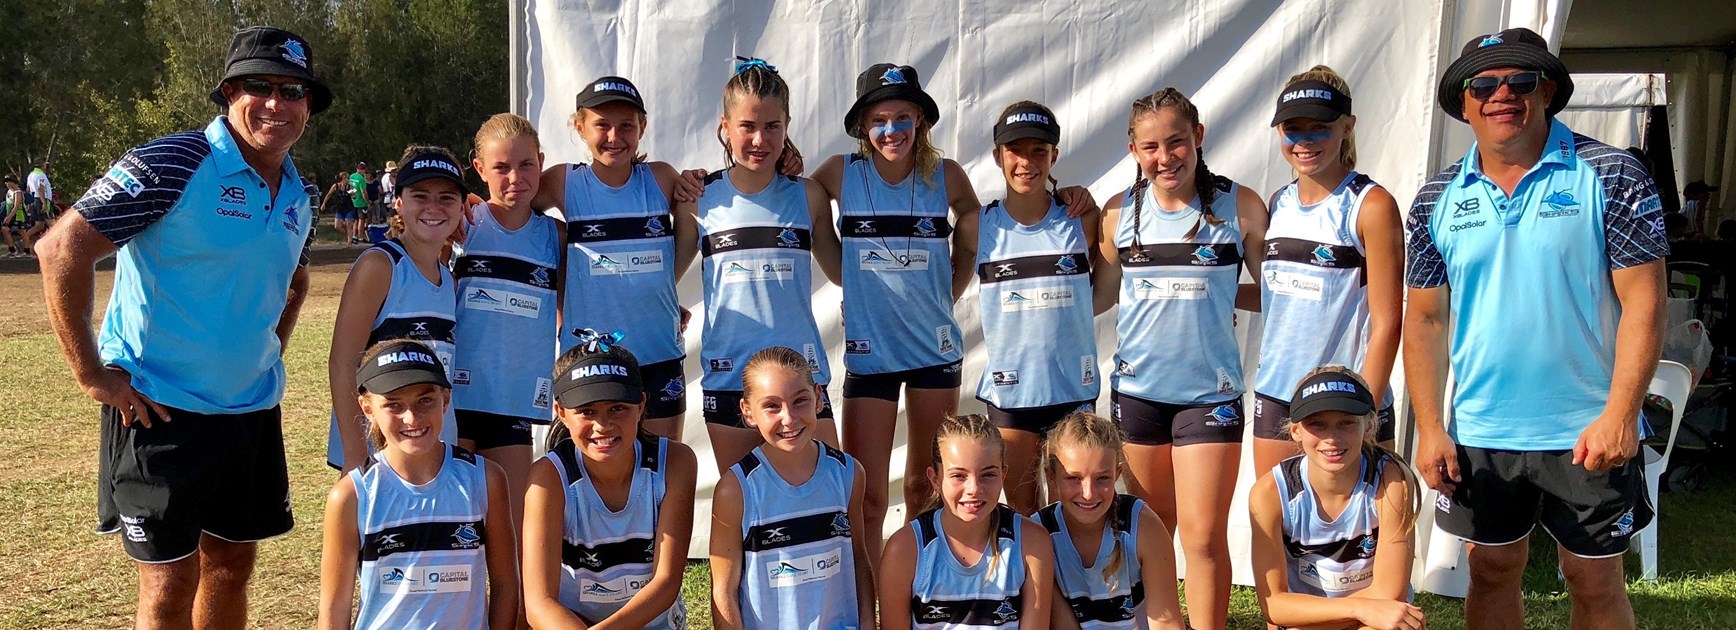 Touch Sharks challenge at State Cup